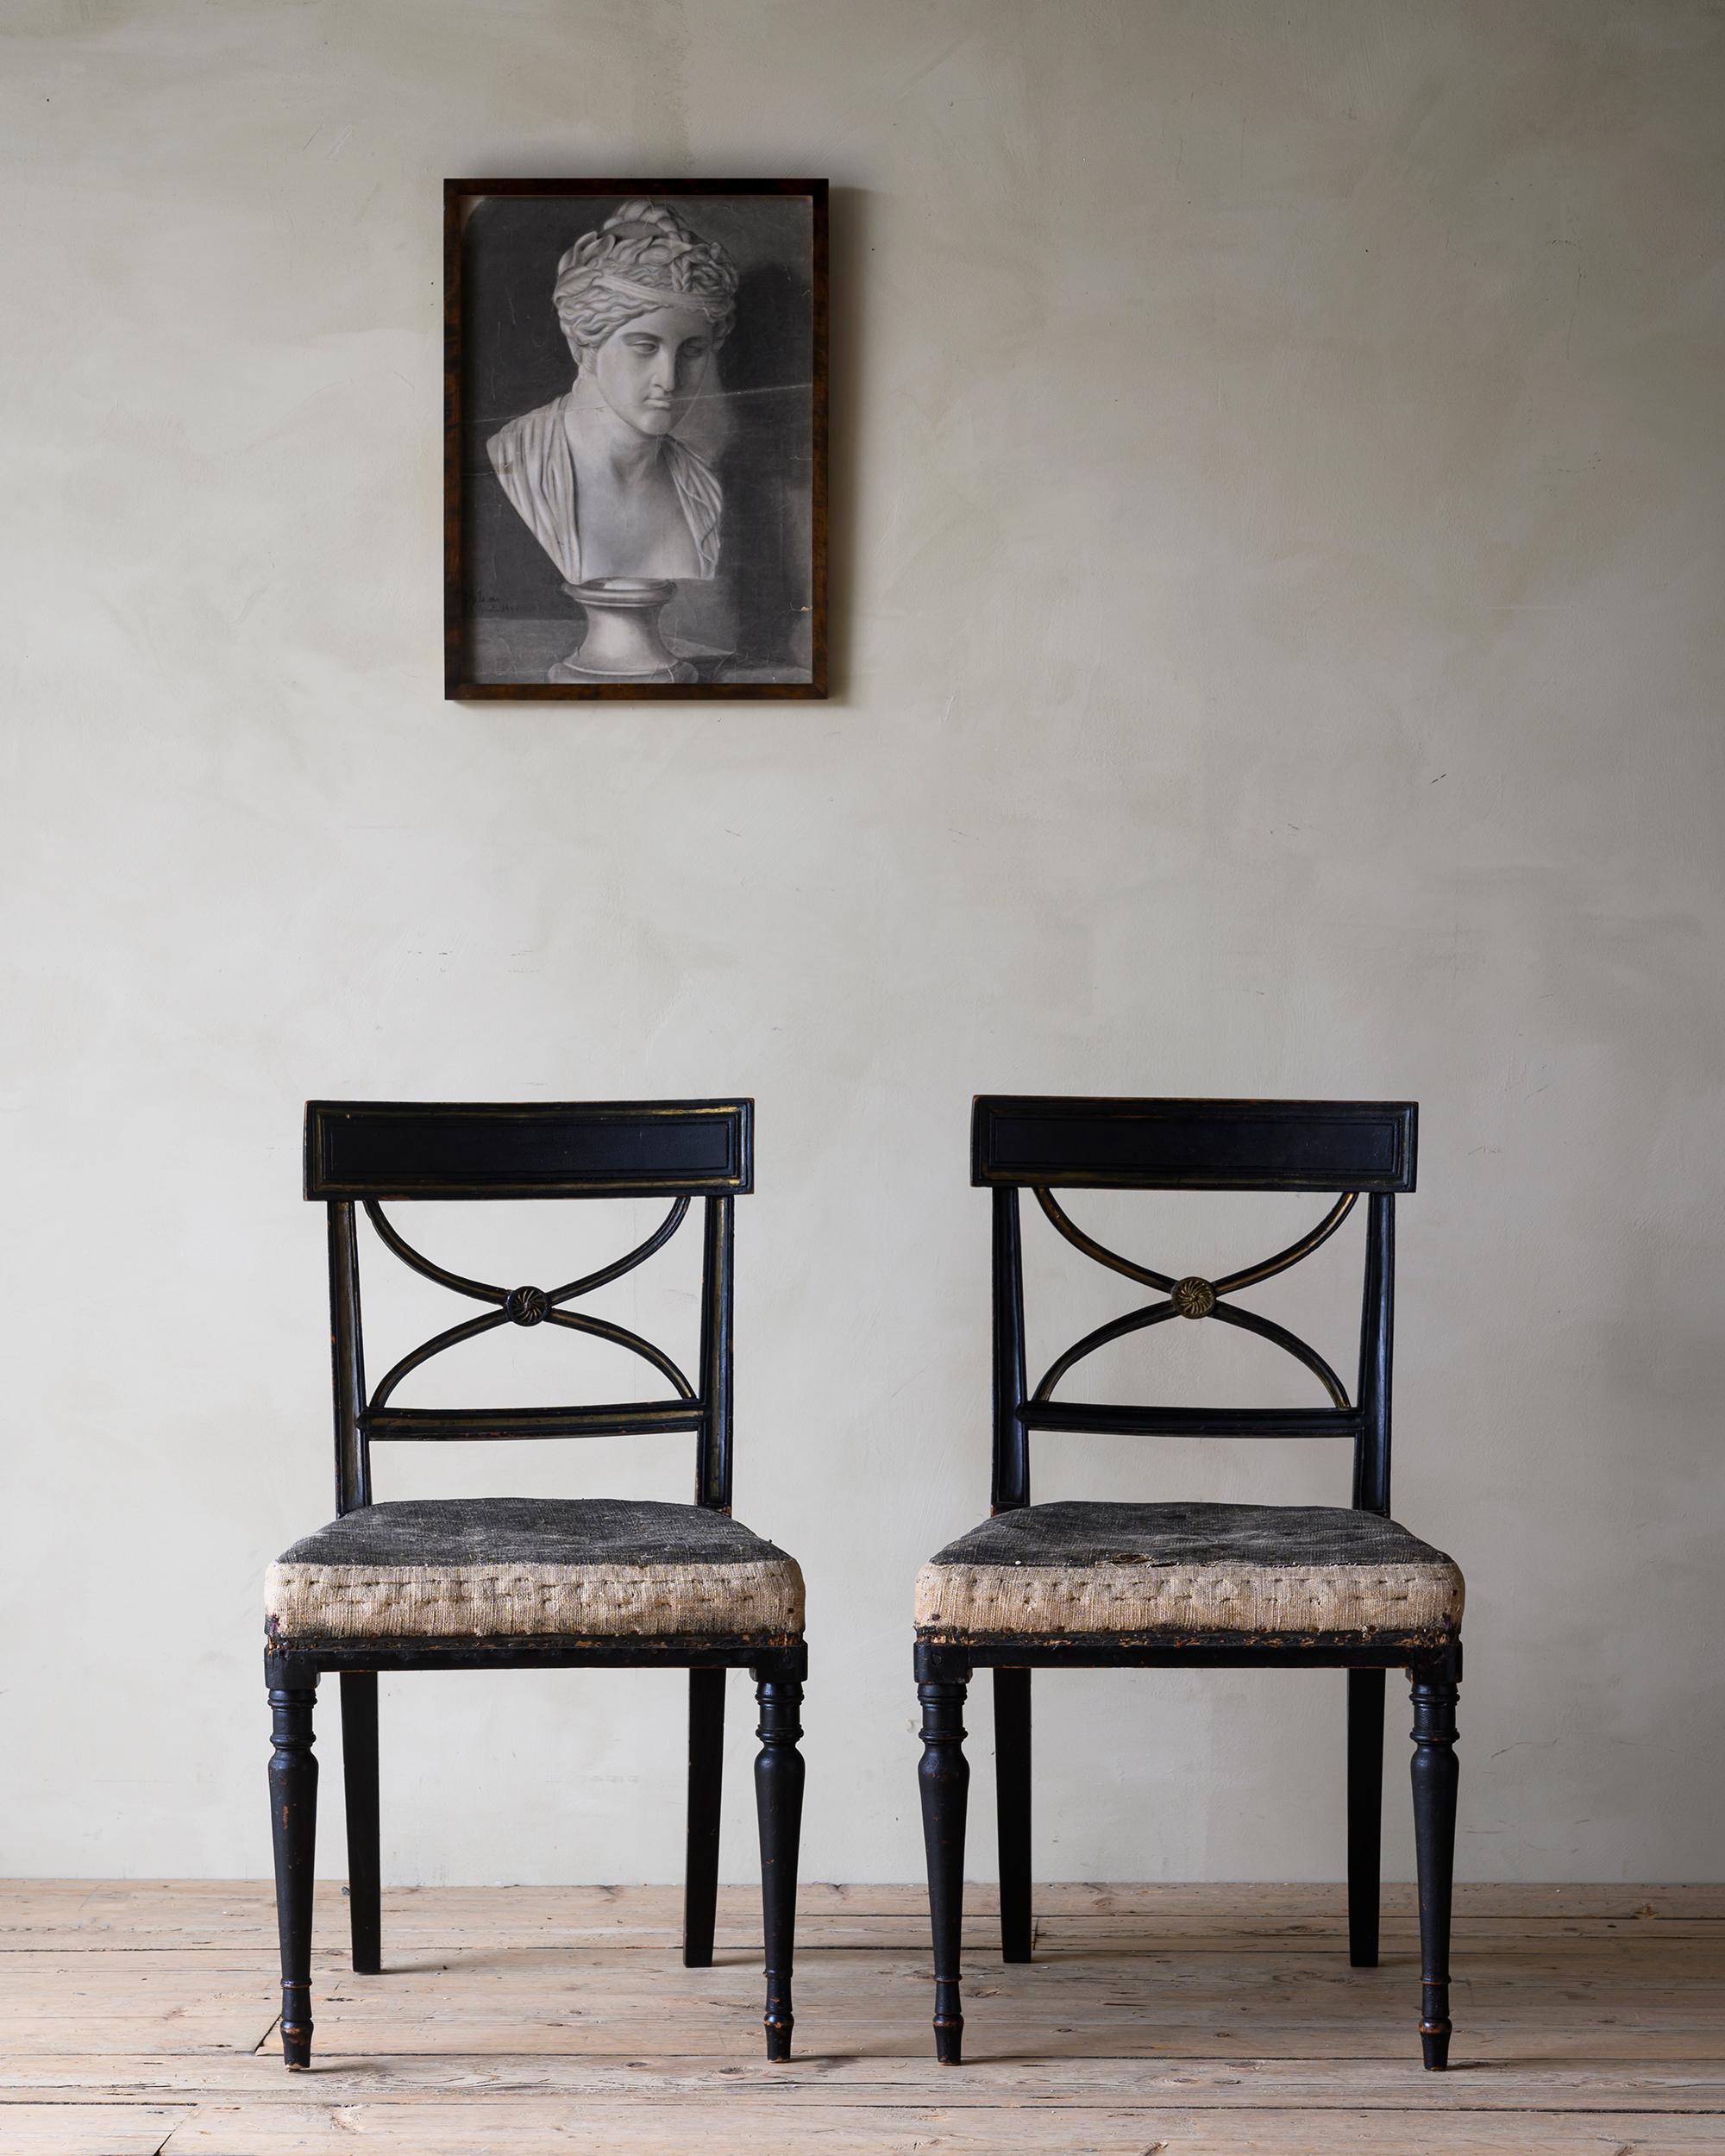 Fine pair of 19th century Gustavian chairs in secondary historical color and it's original padding, ca 1810 Stockholm, Sweden. 

This particular model is called Bellman, after Carl Michael Bellman (1740 - 1795) a Swedish songwriter, composer,